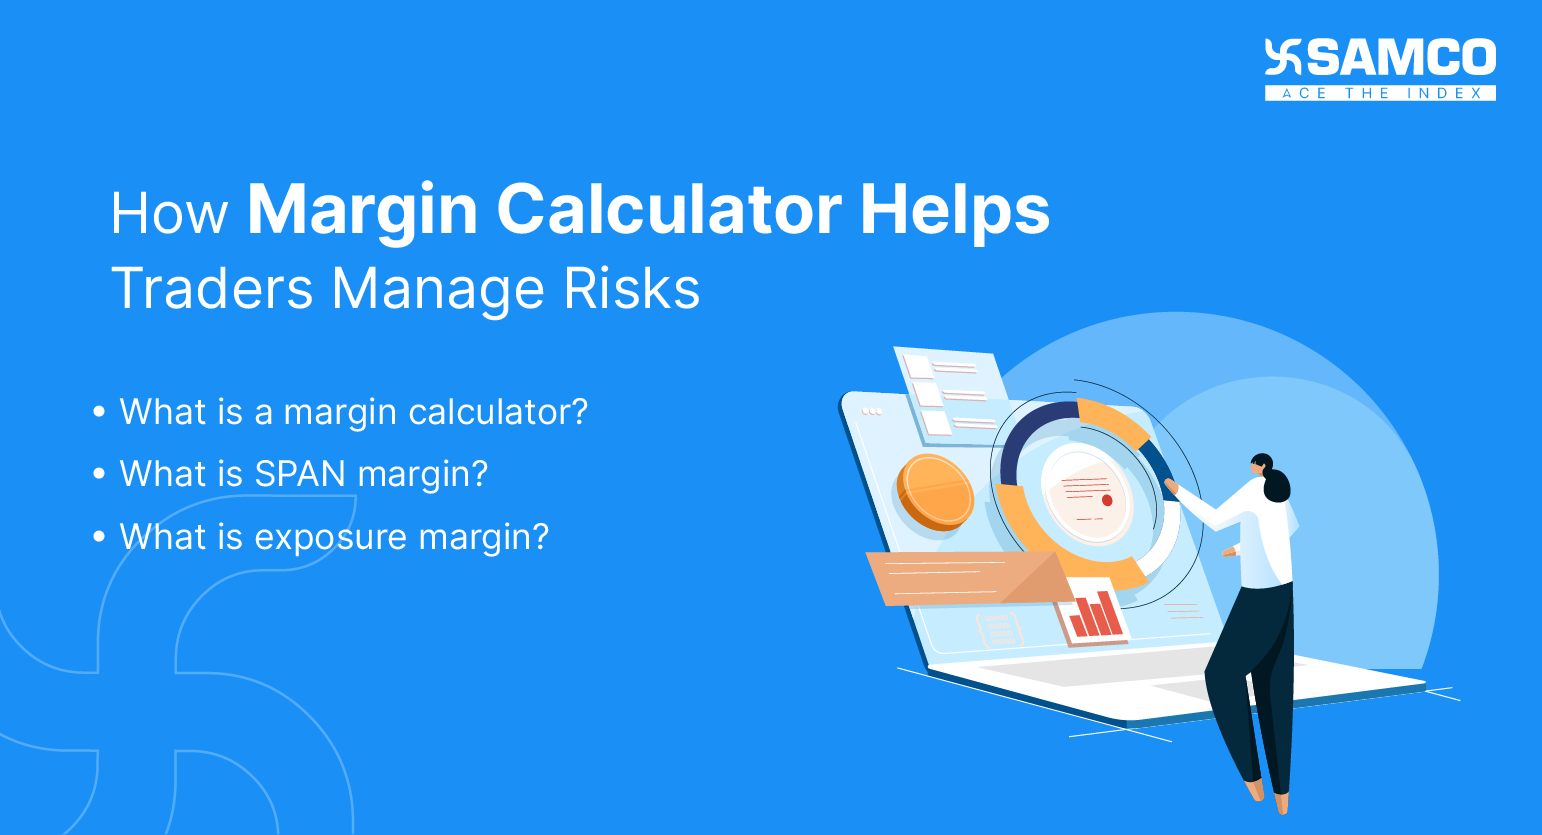 How Margin Calculator Helps Traders Manage Risks